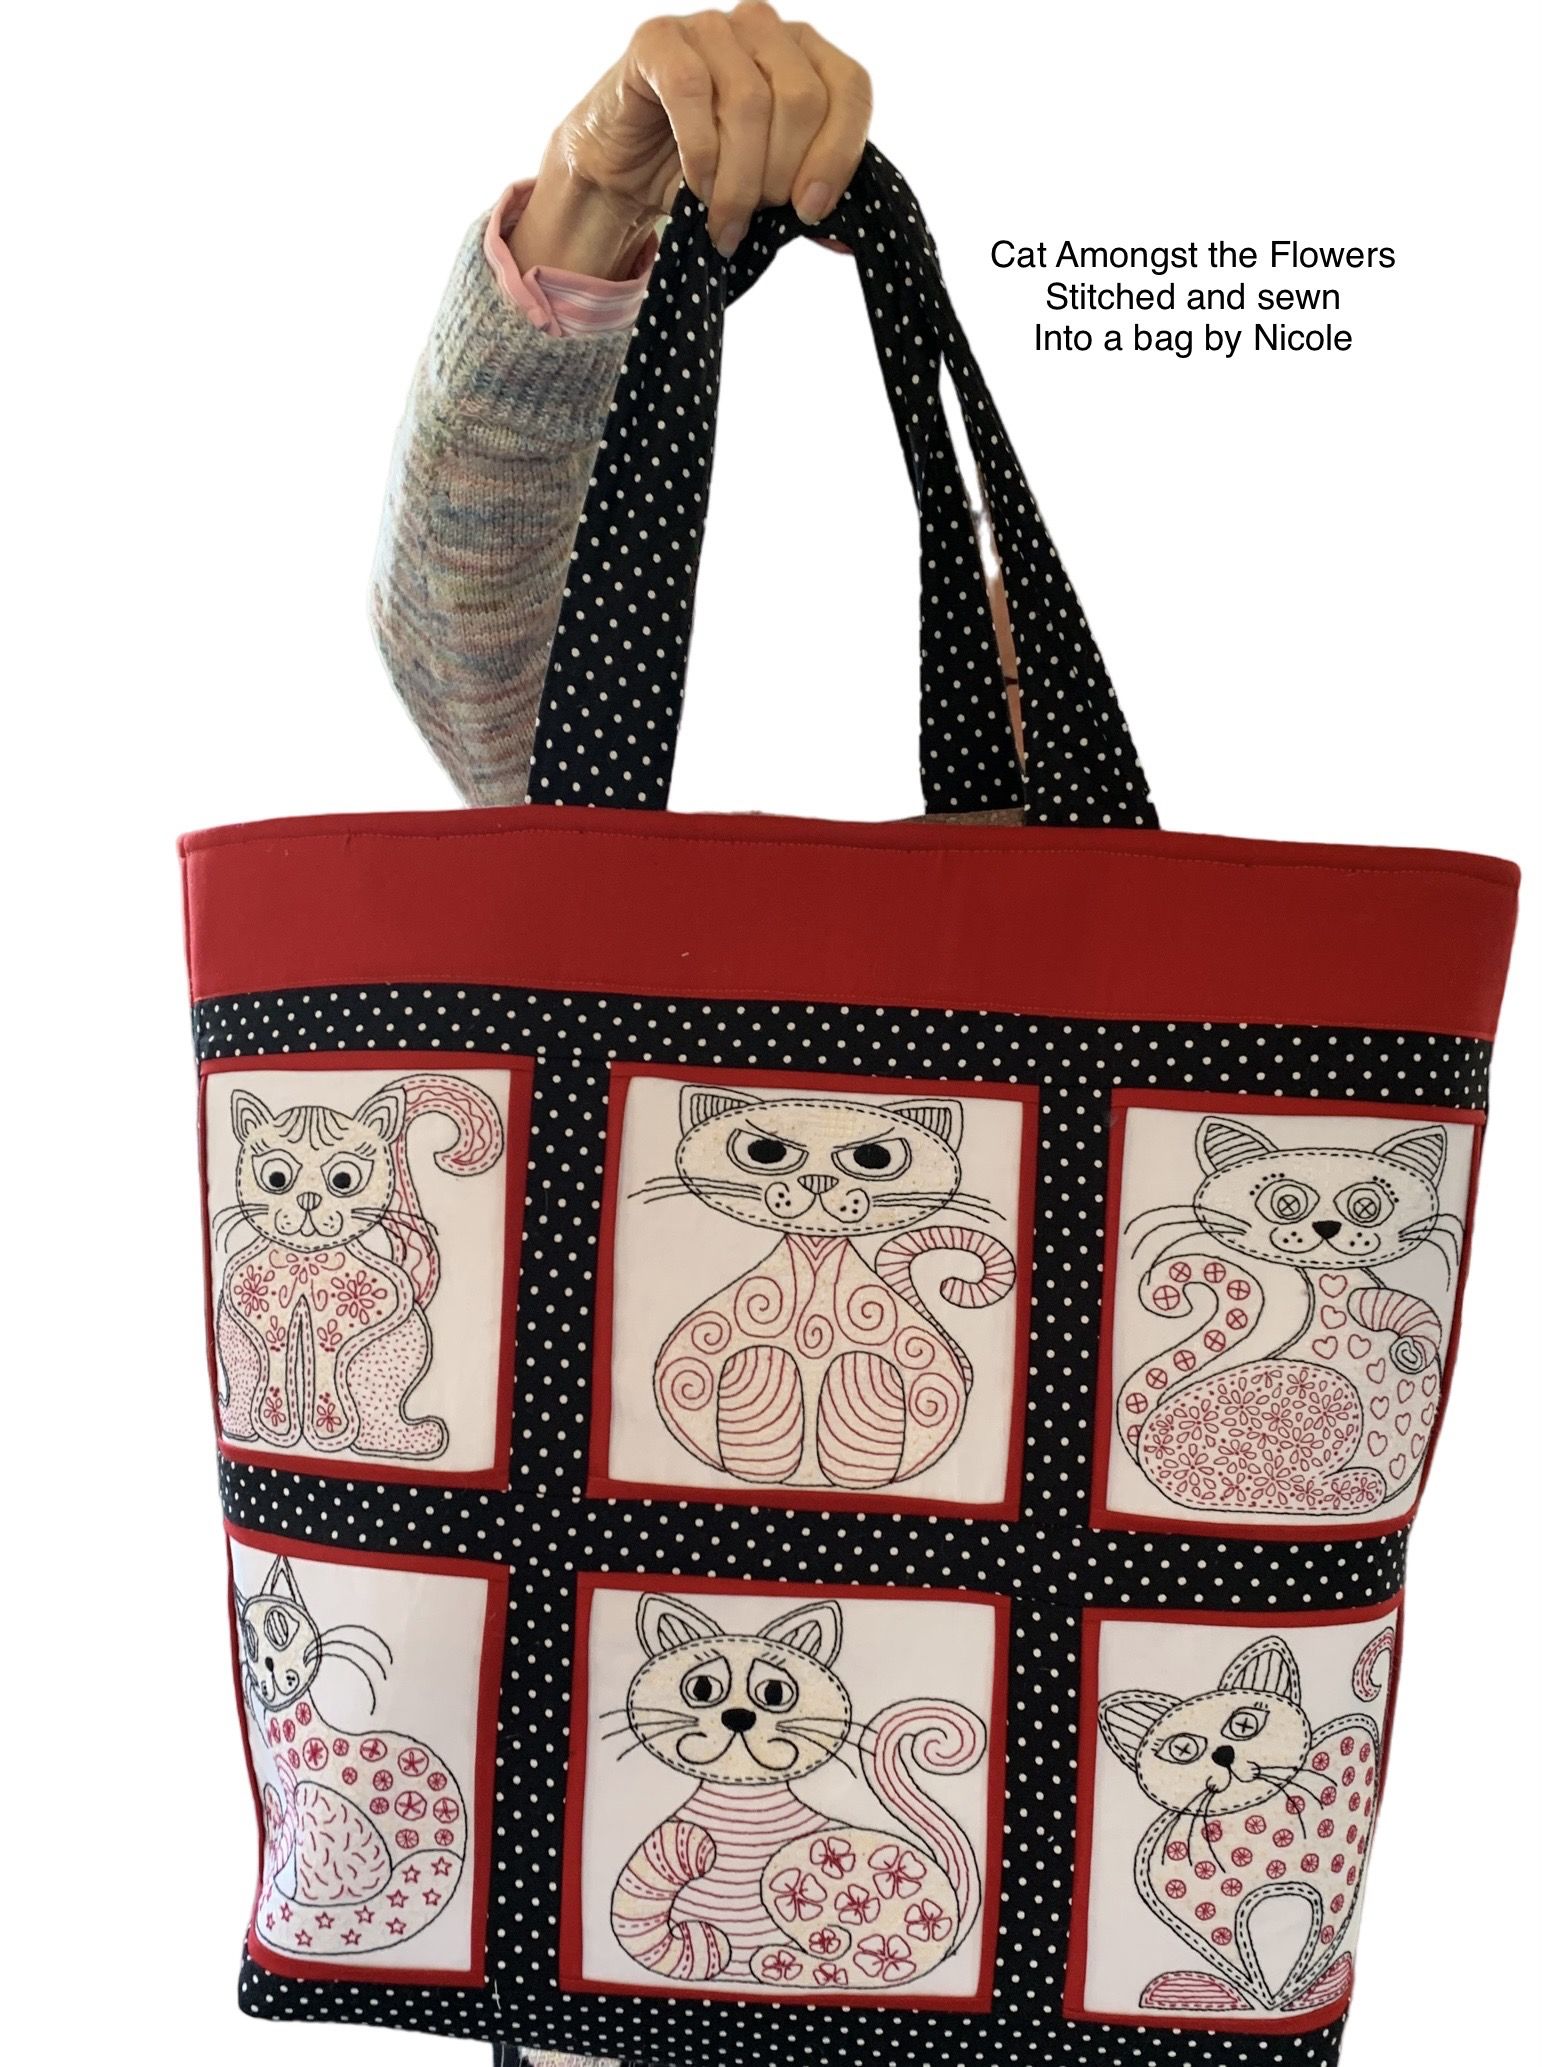 Cat amongst the flowers ~ bag by Nicole